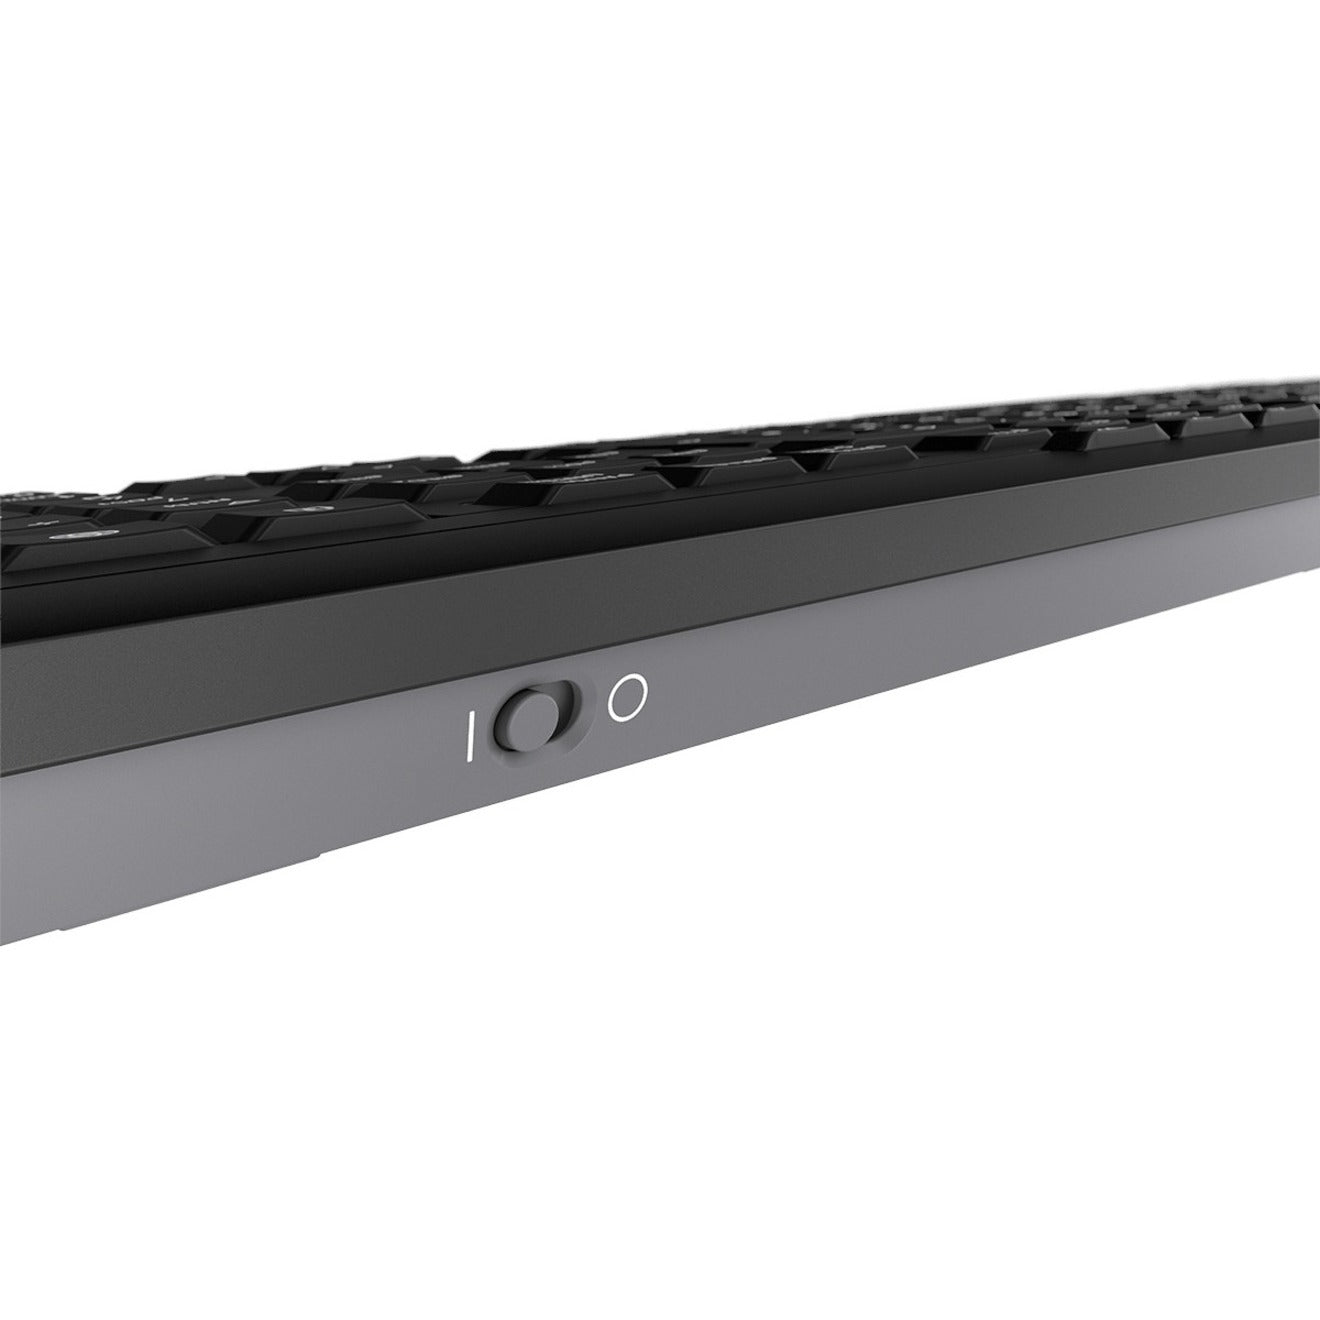 CHERRY JK-8500GB-2 STREAM Keyboard, Spill Resistant, Abrasion Resistant, USB Connectivity